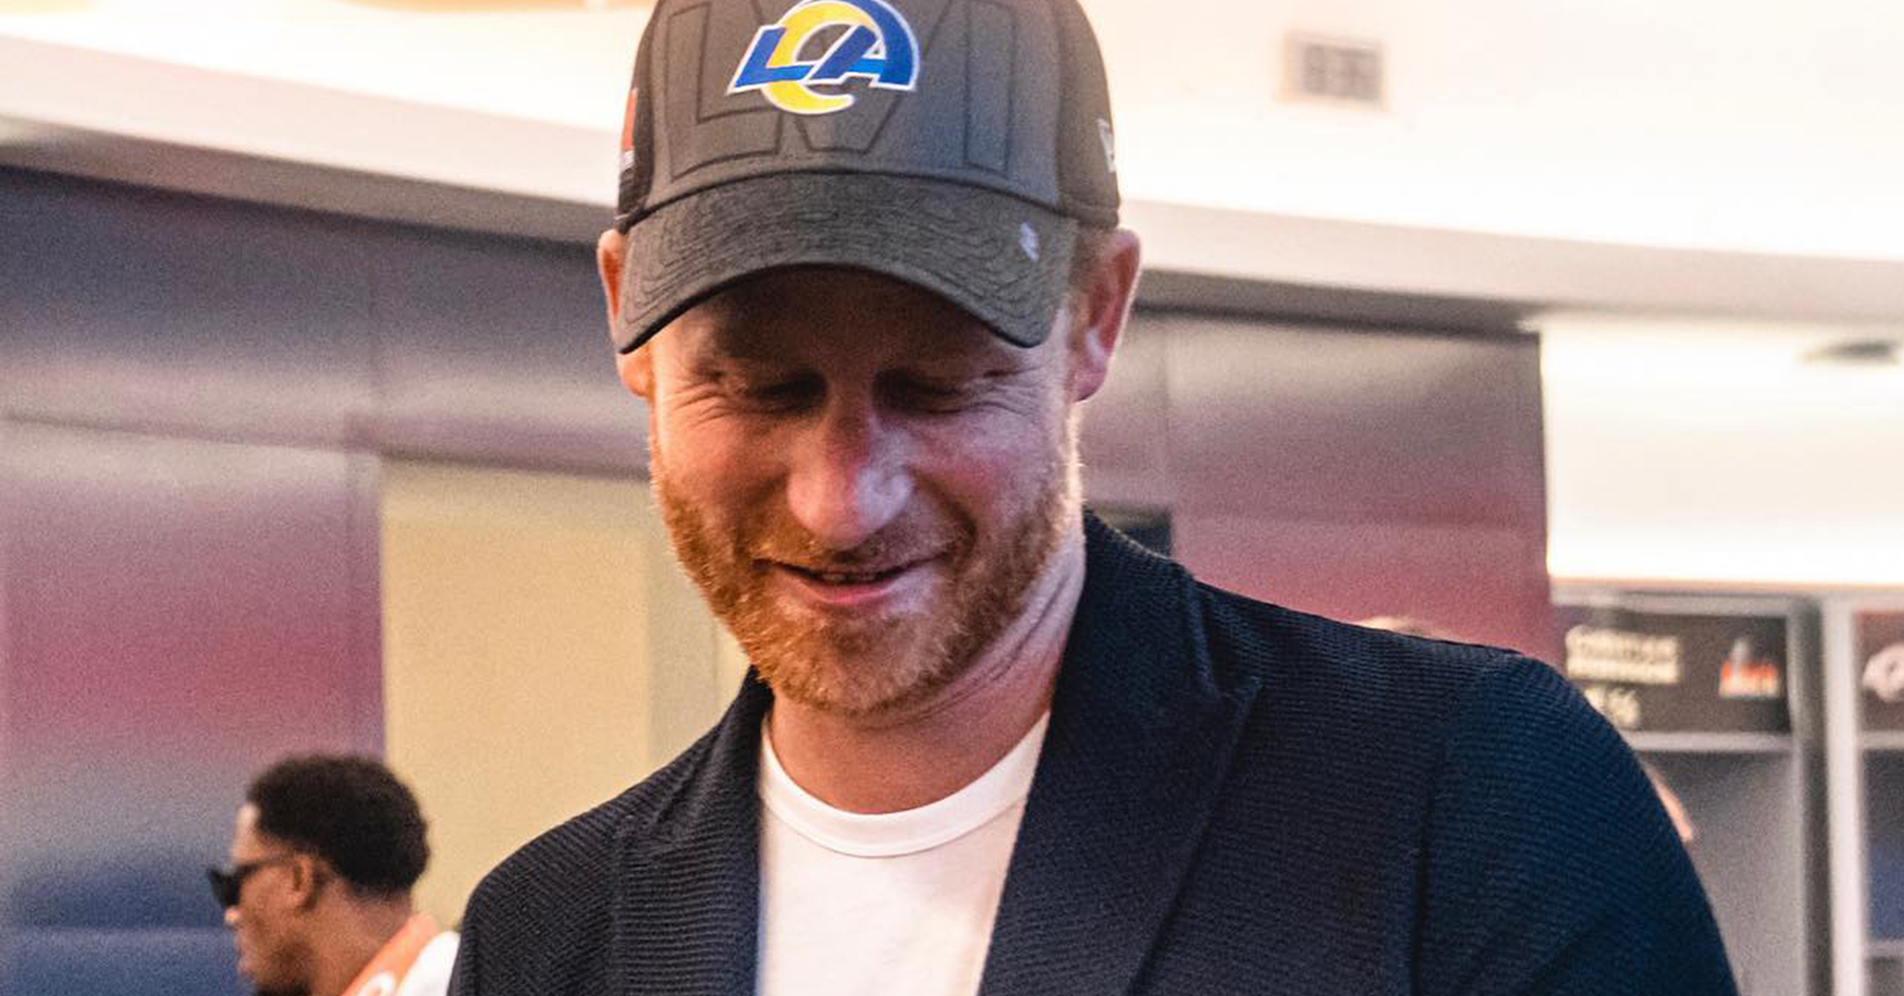 See Prince Harry as we’ve never seen him before in revealing new photos from his Super Bowl trip